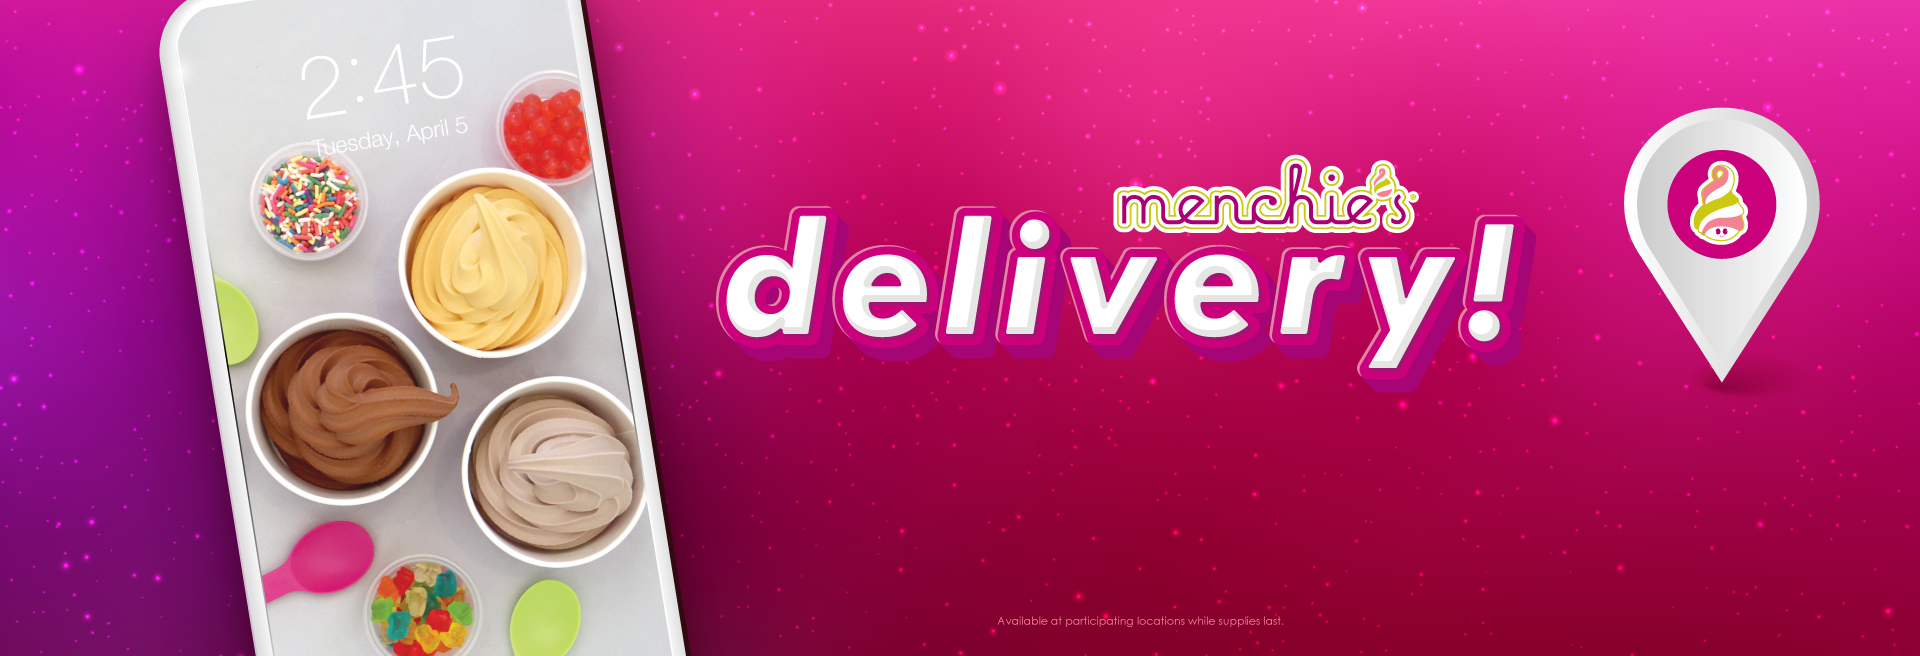 Order Menchie’s delivery today!